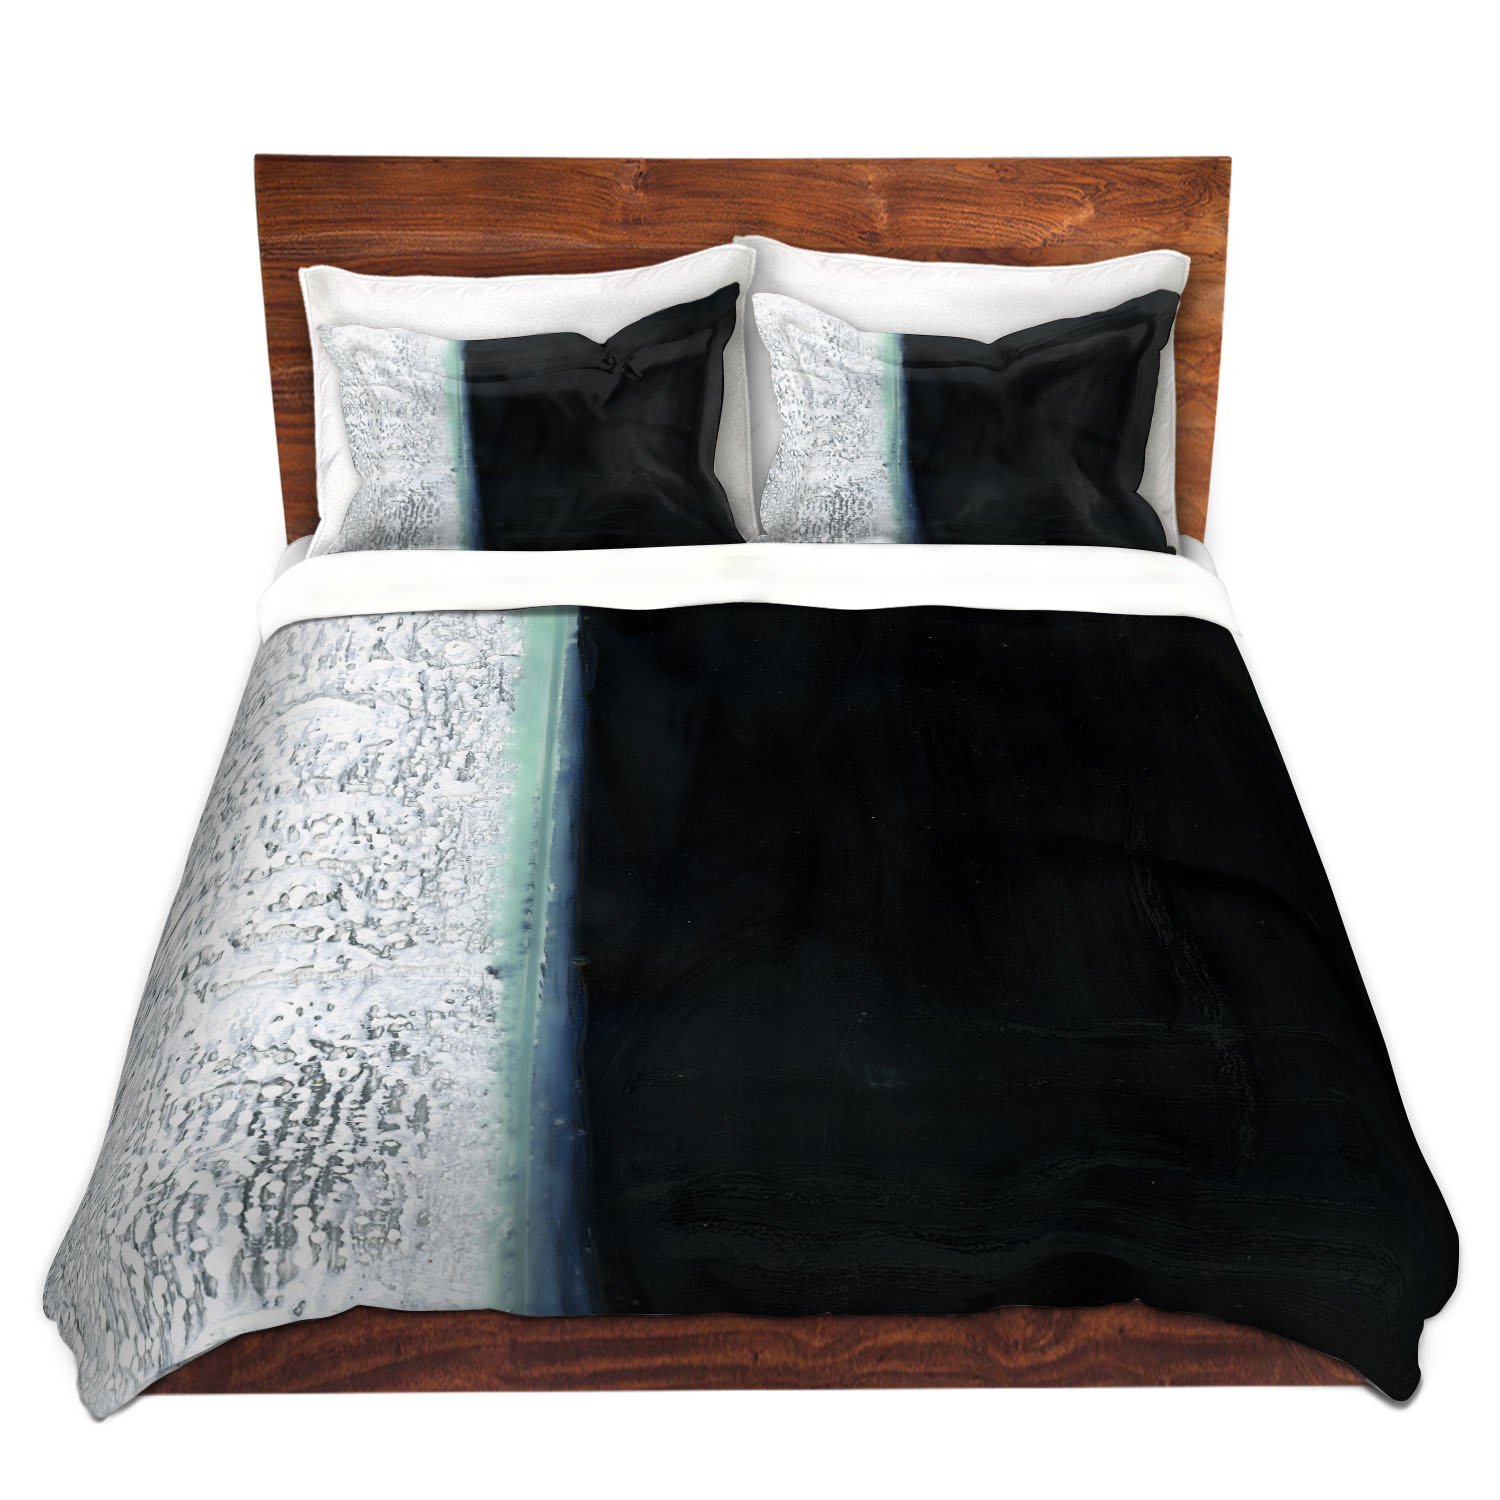 Dianoche Microfiber Duvet Covers By Dora Ficher - Not Always Black Or White 9